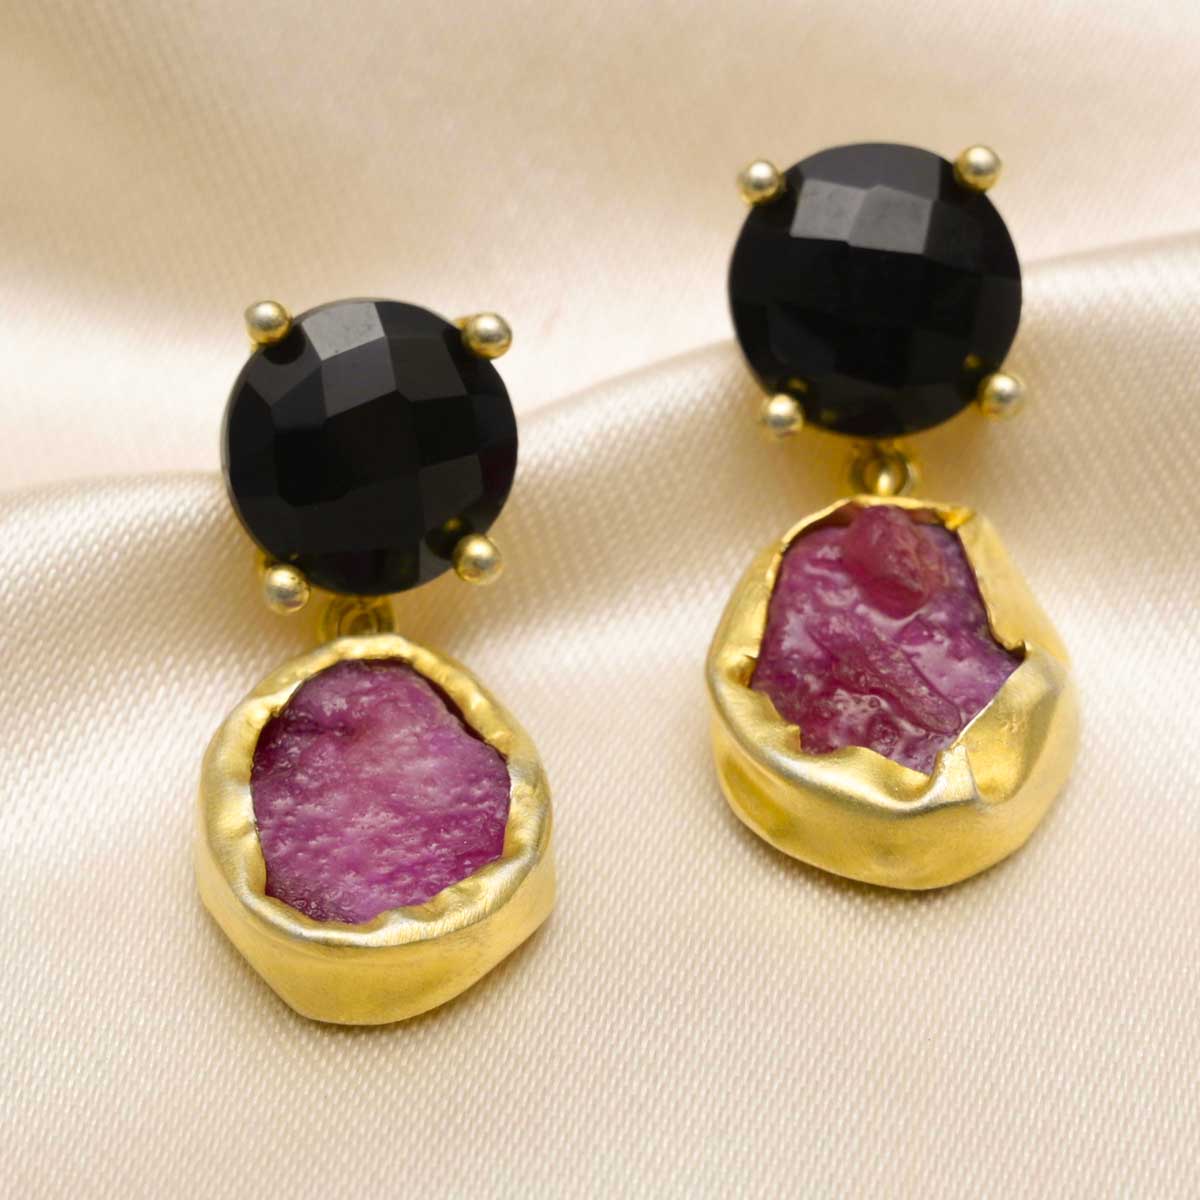 The Charcoal and Fire Ruby Black Onyx Gold Earrings